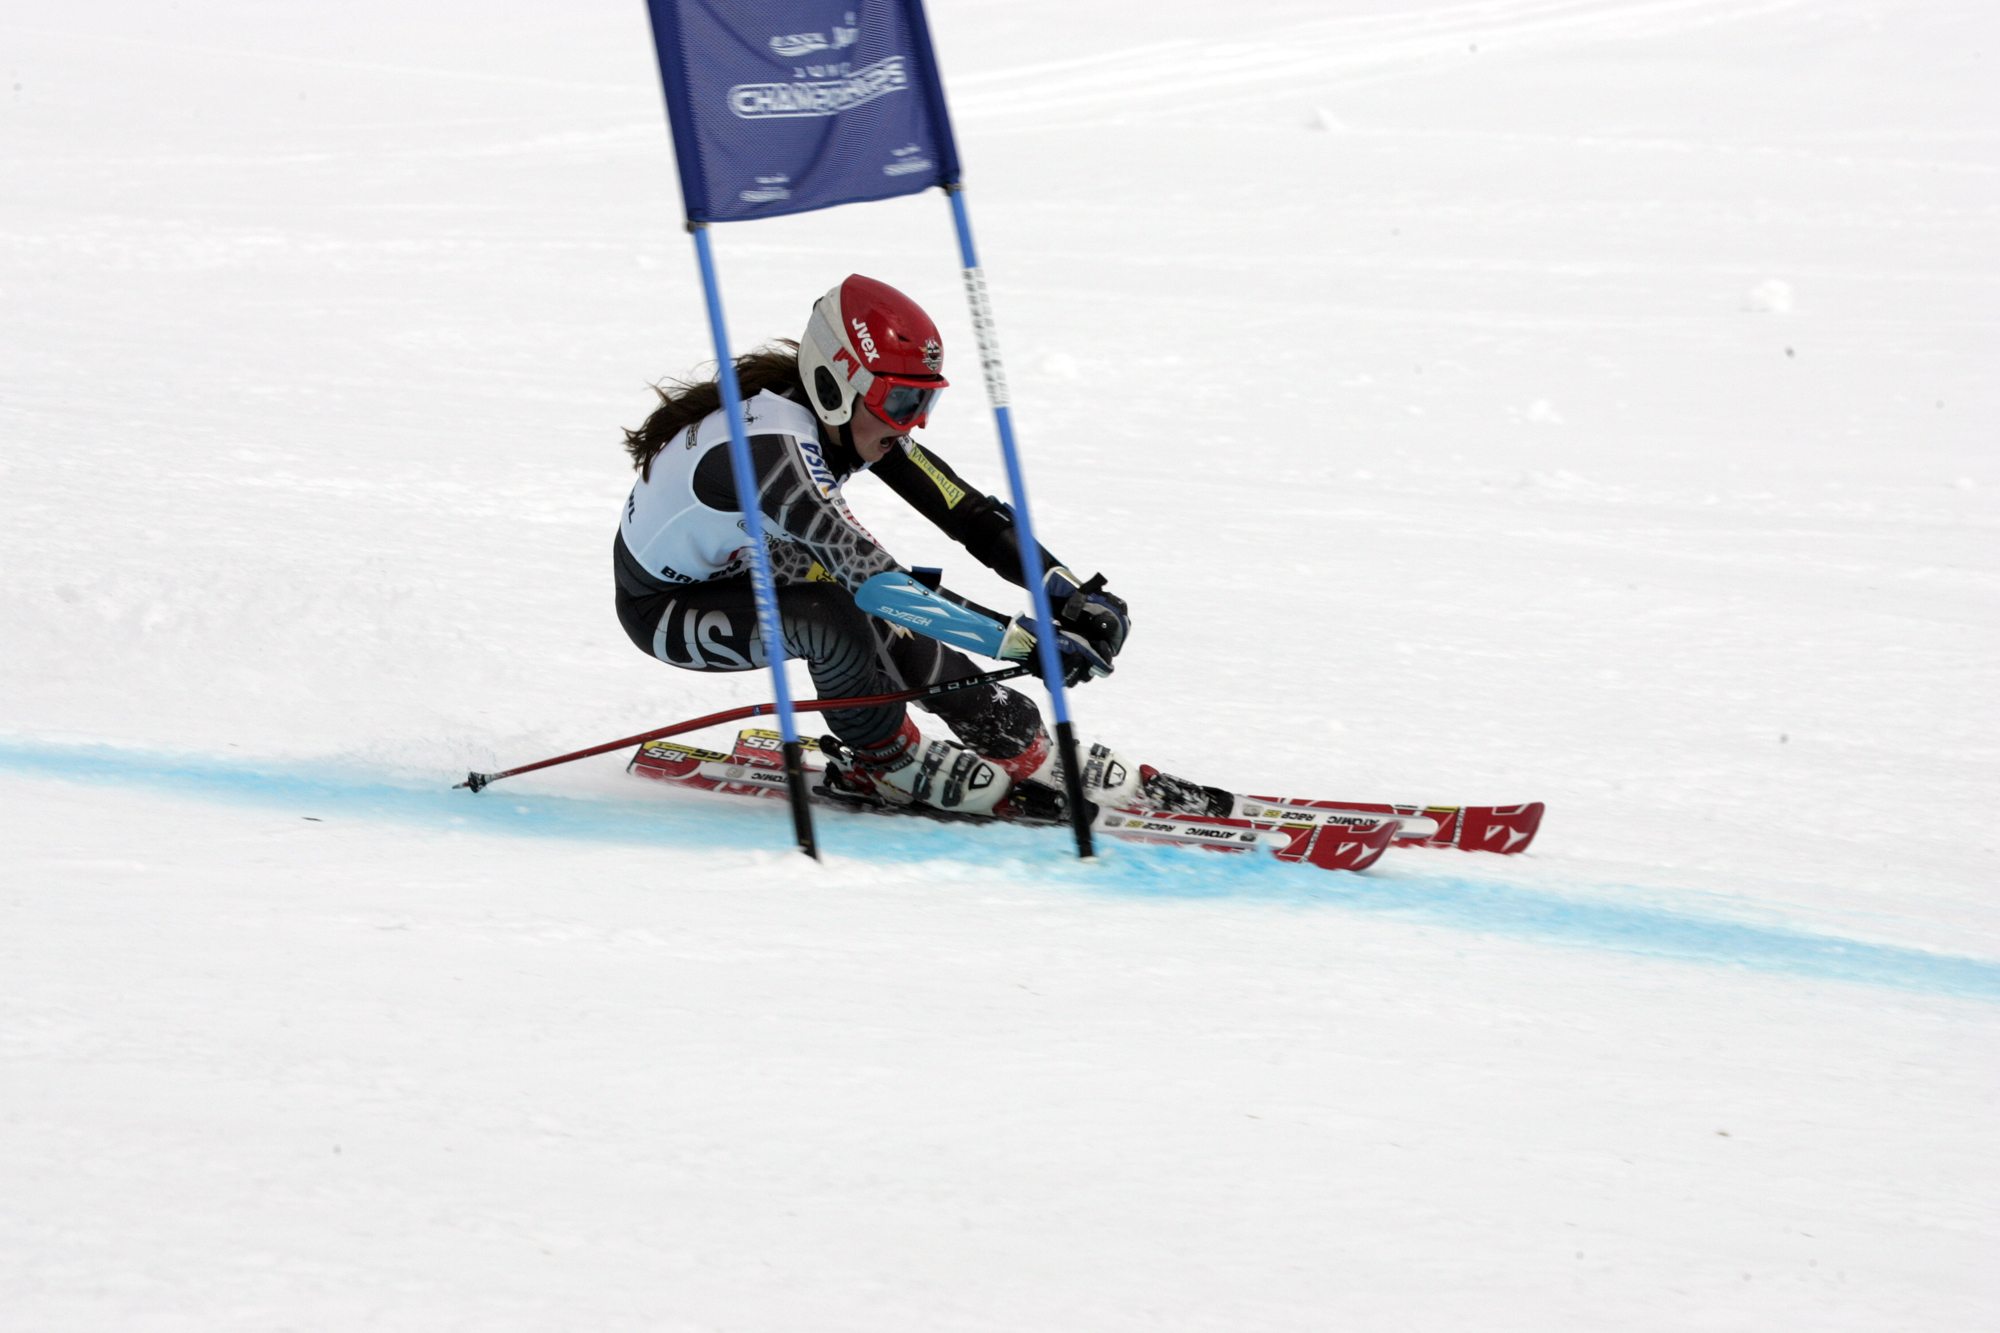 Photo courtesy of Rich Lodmell
Vancouver's Ashley Lodmell, 13, placed eighth in the Giant Slalom at the Western Region Junior Skiing Championships.